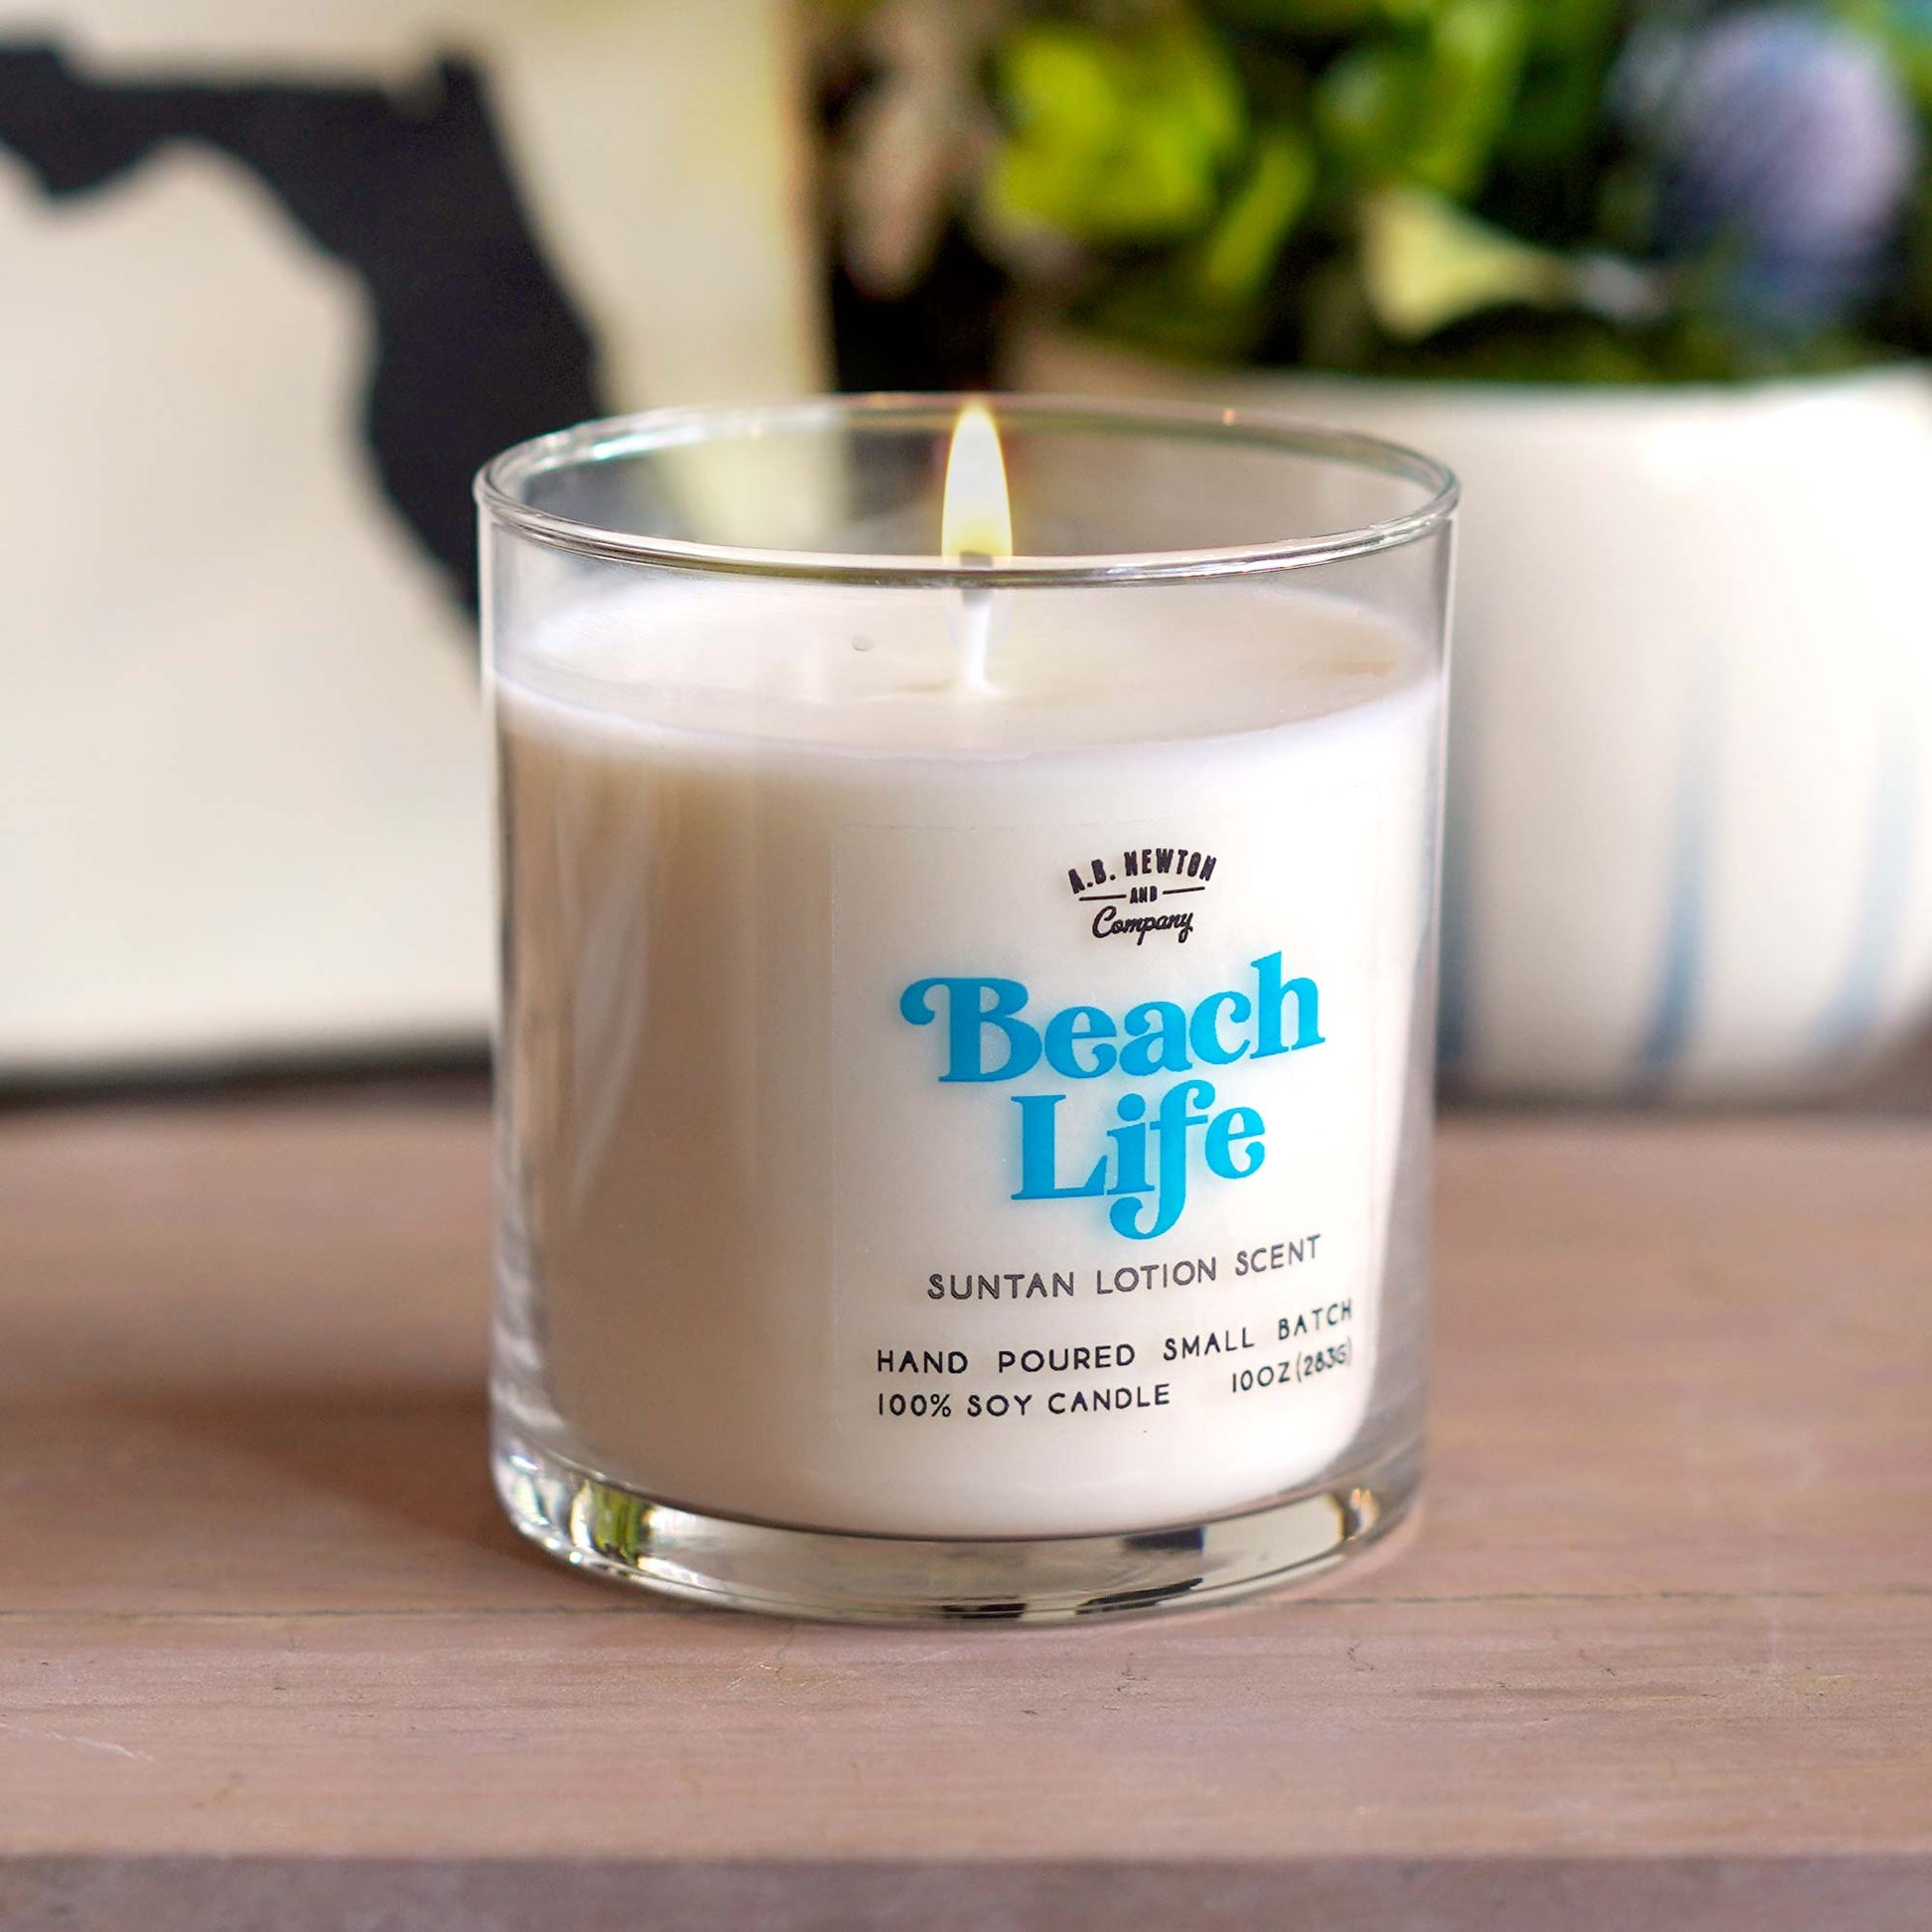 Beach Life Suntan Lotion Scented Soy Candle Hand Poured Small Batch - A. B. Newton and Company